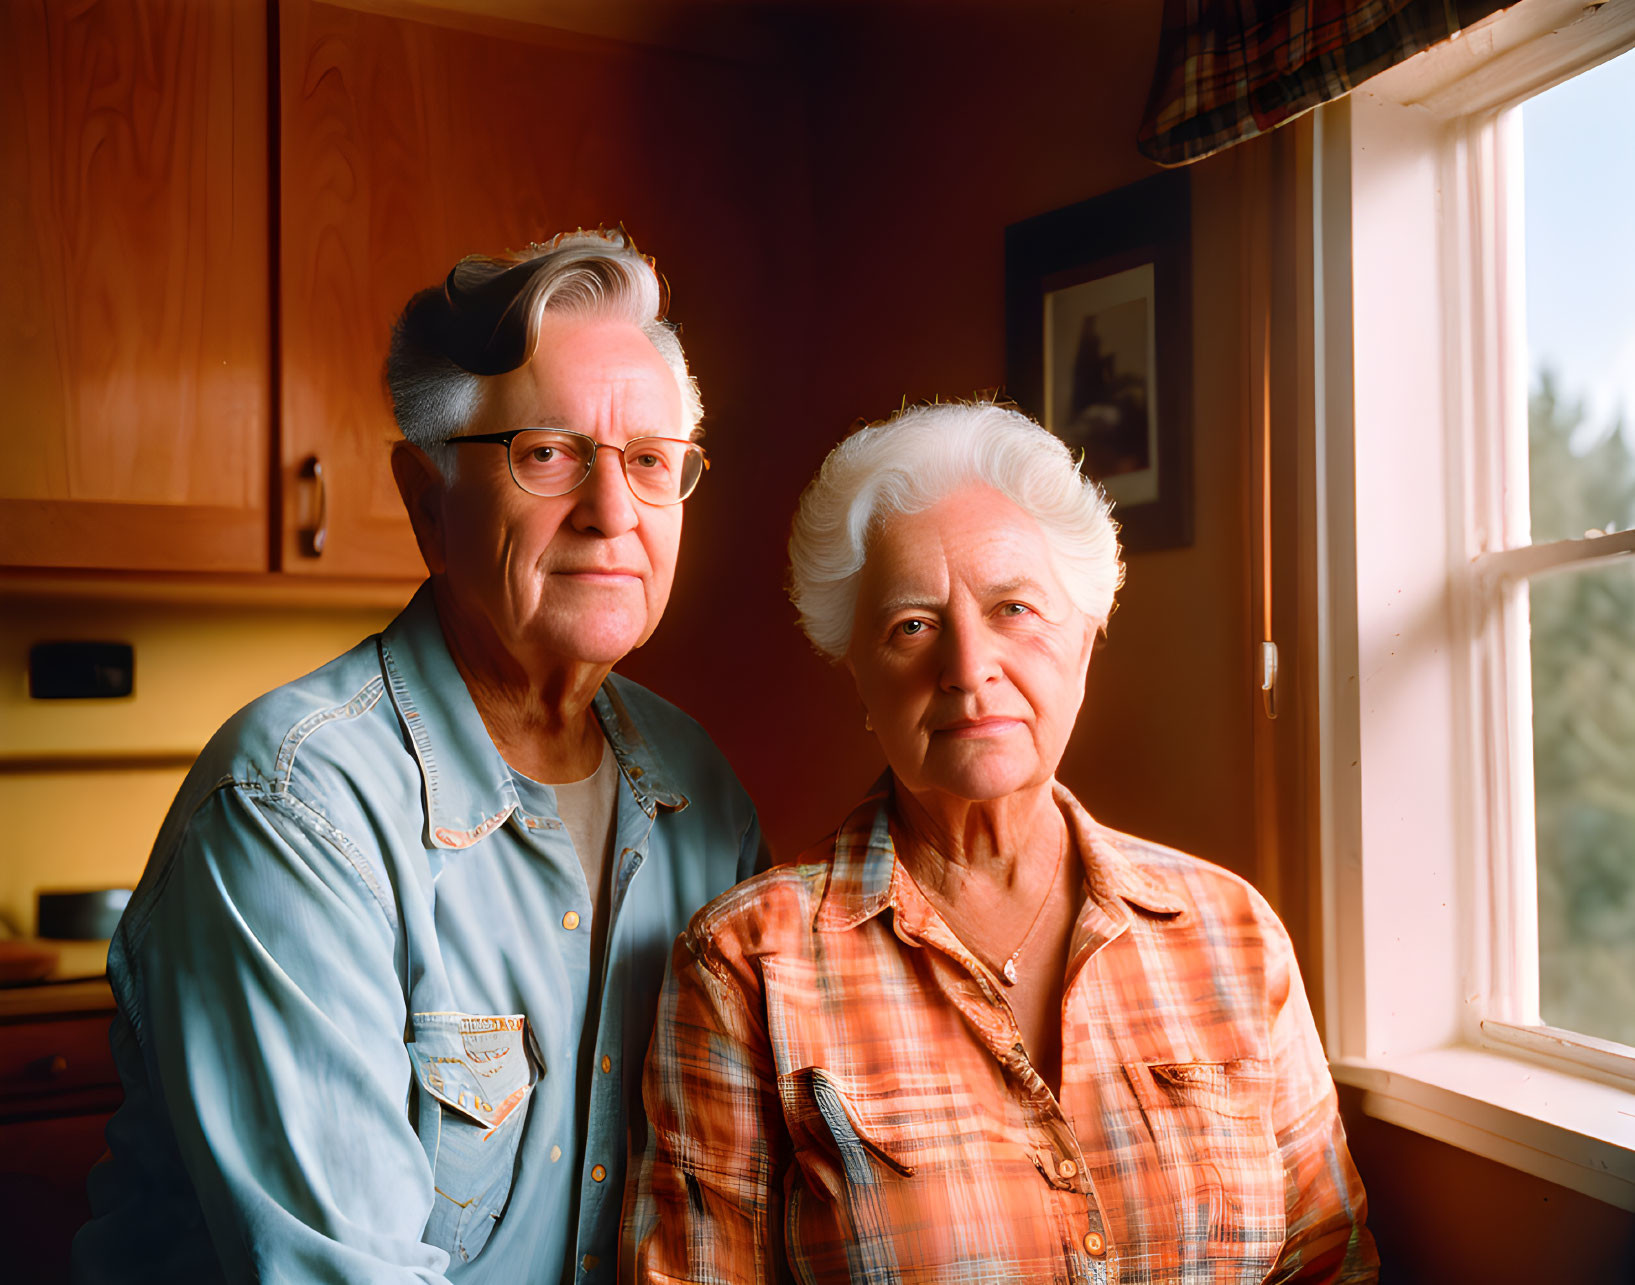 Elderly Couple with White Hair in Blue and Orange Shirts Sitting Indoors